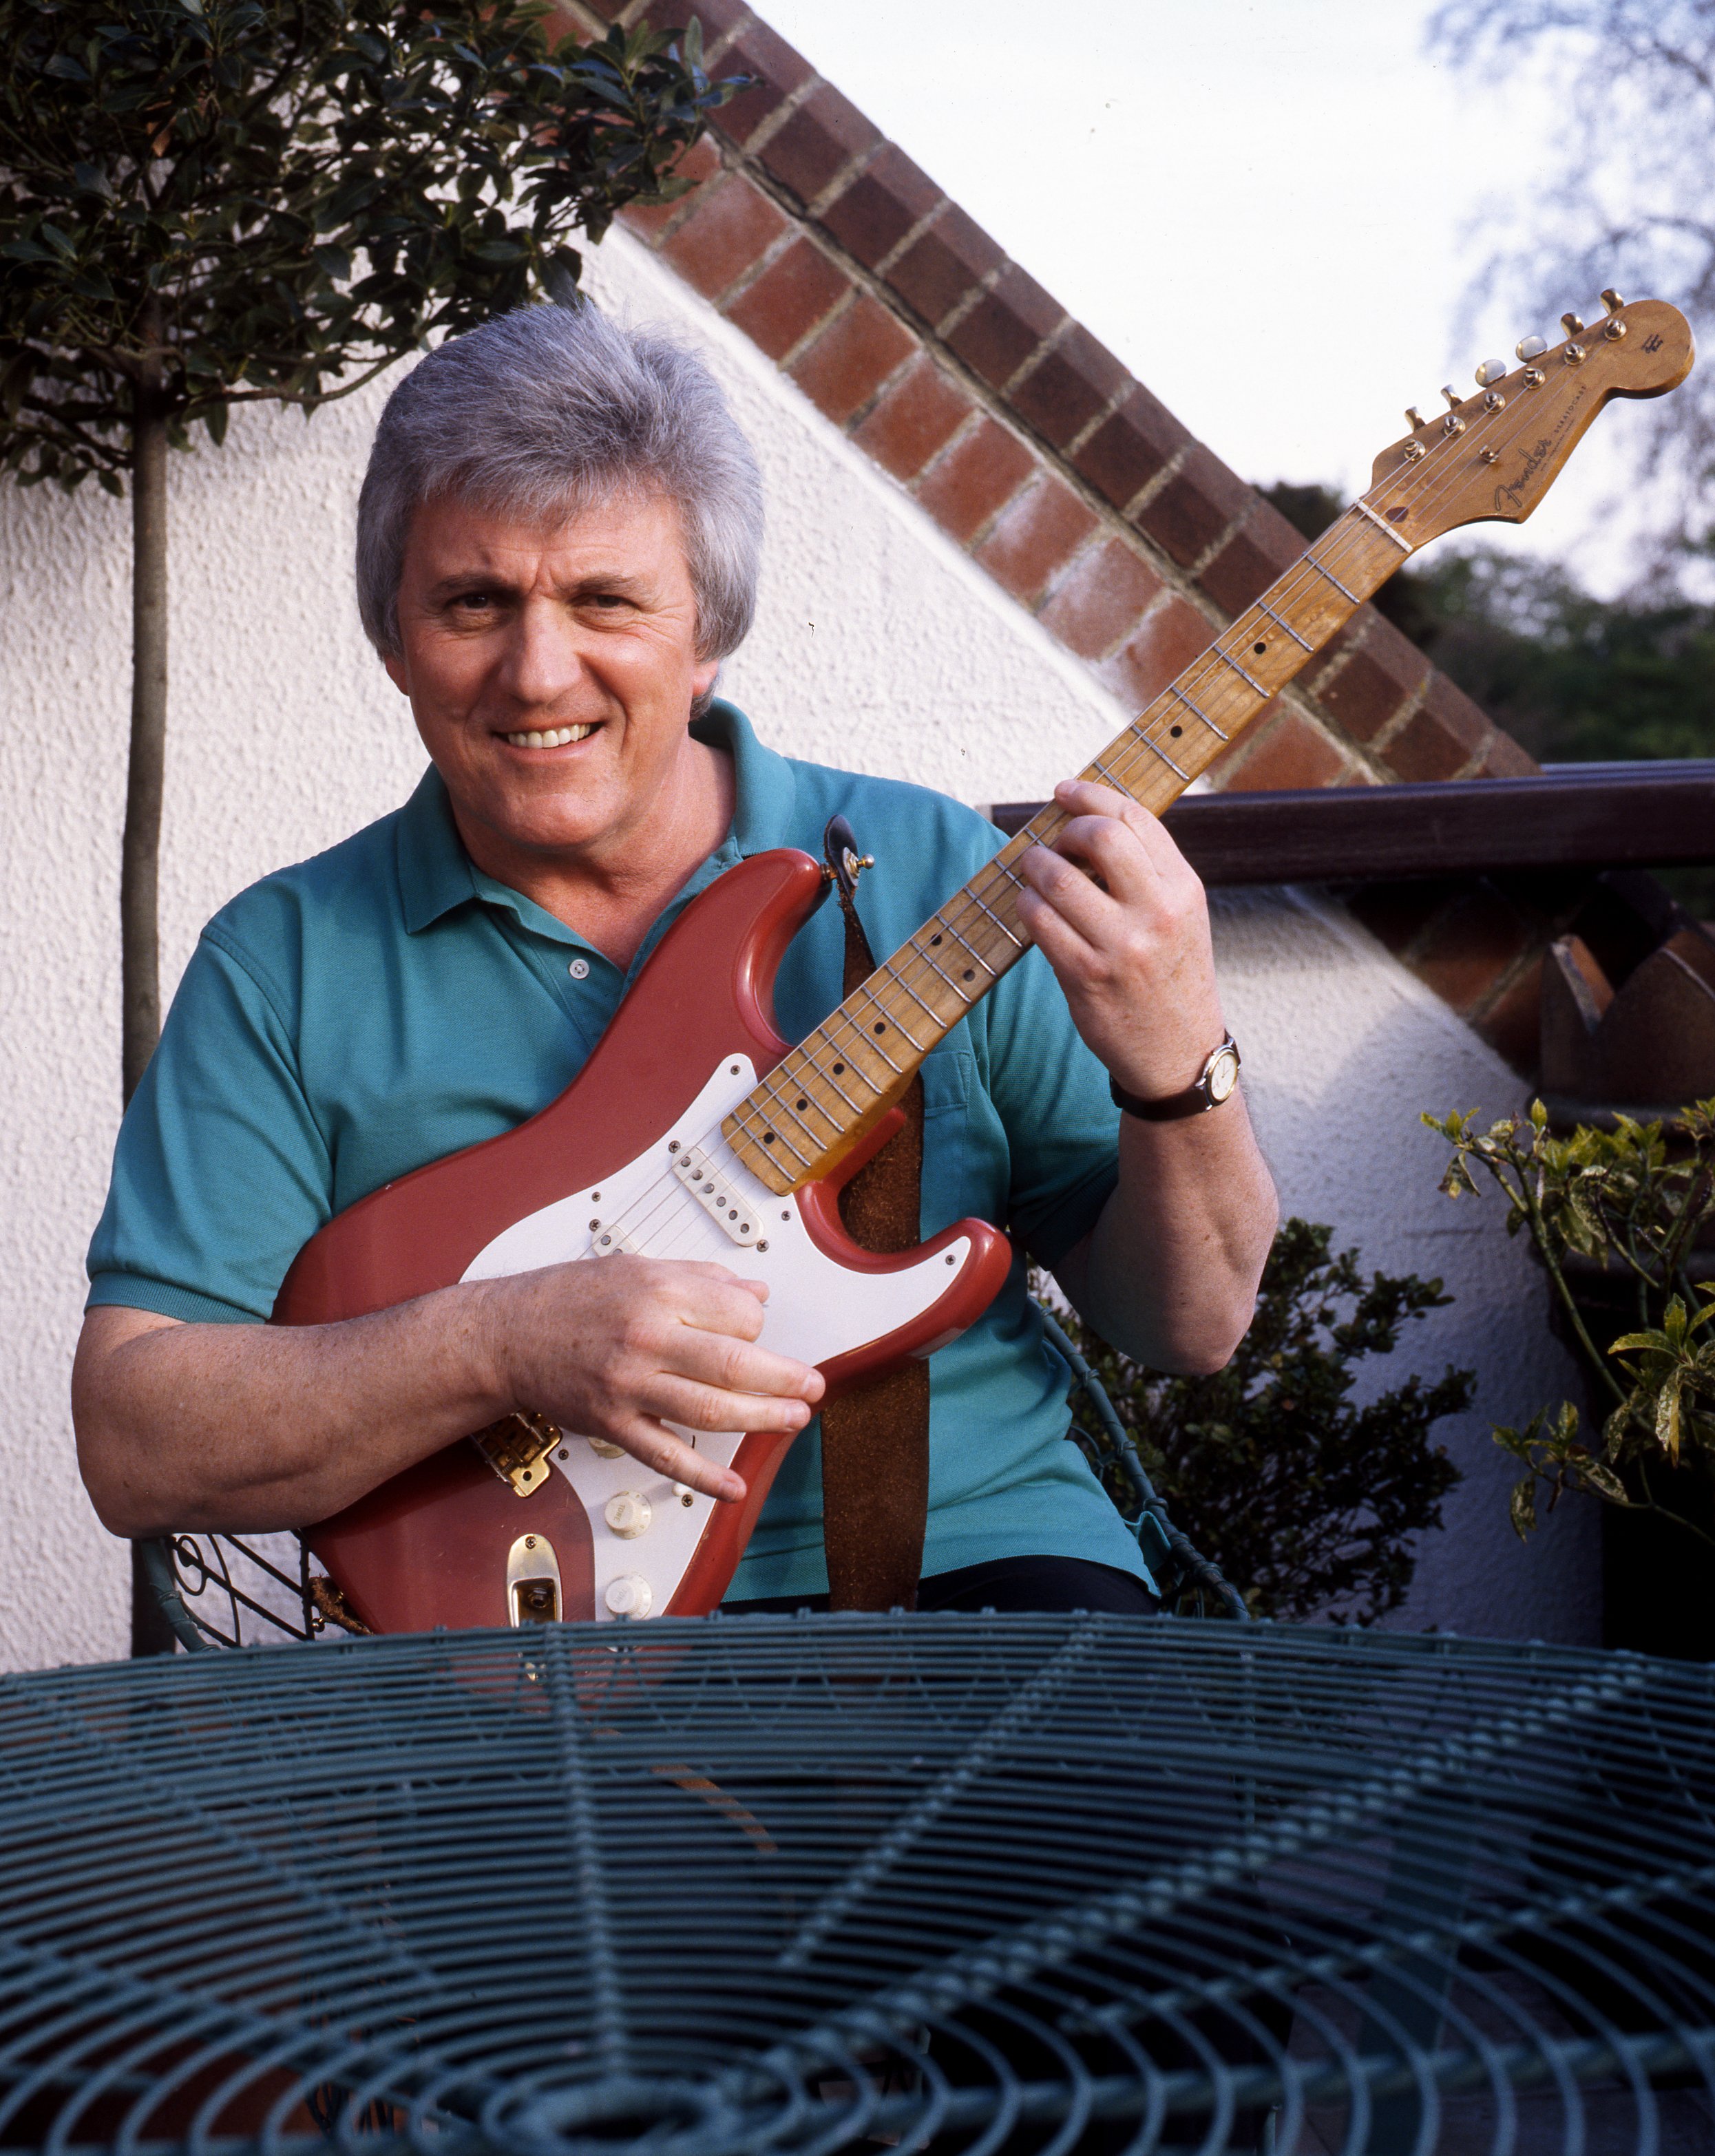 Bruce Welch holding "The Shadows" 1959 Fender Stratocaster, played by Hank Marvin and owned by Bruce Welch in the UK in 1997 | Source: Getty Images